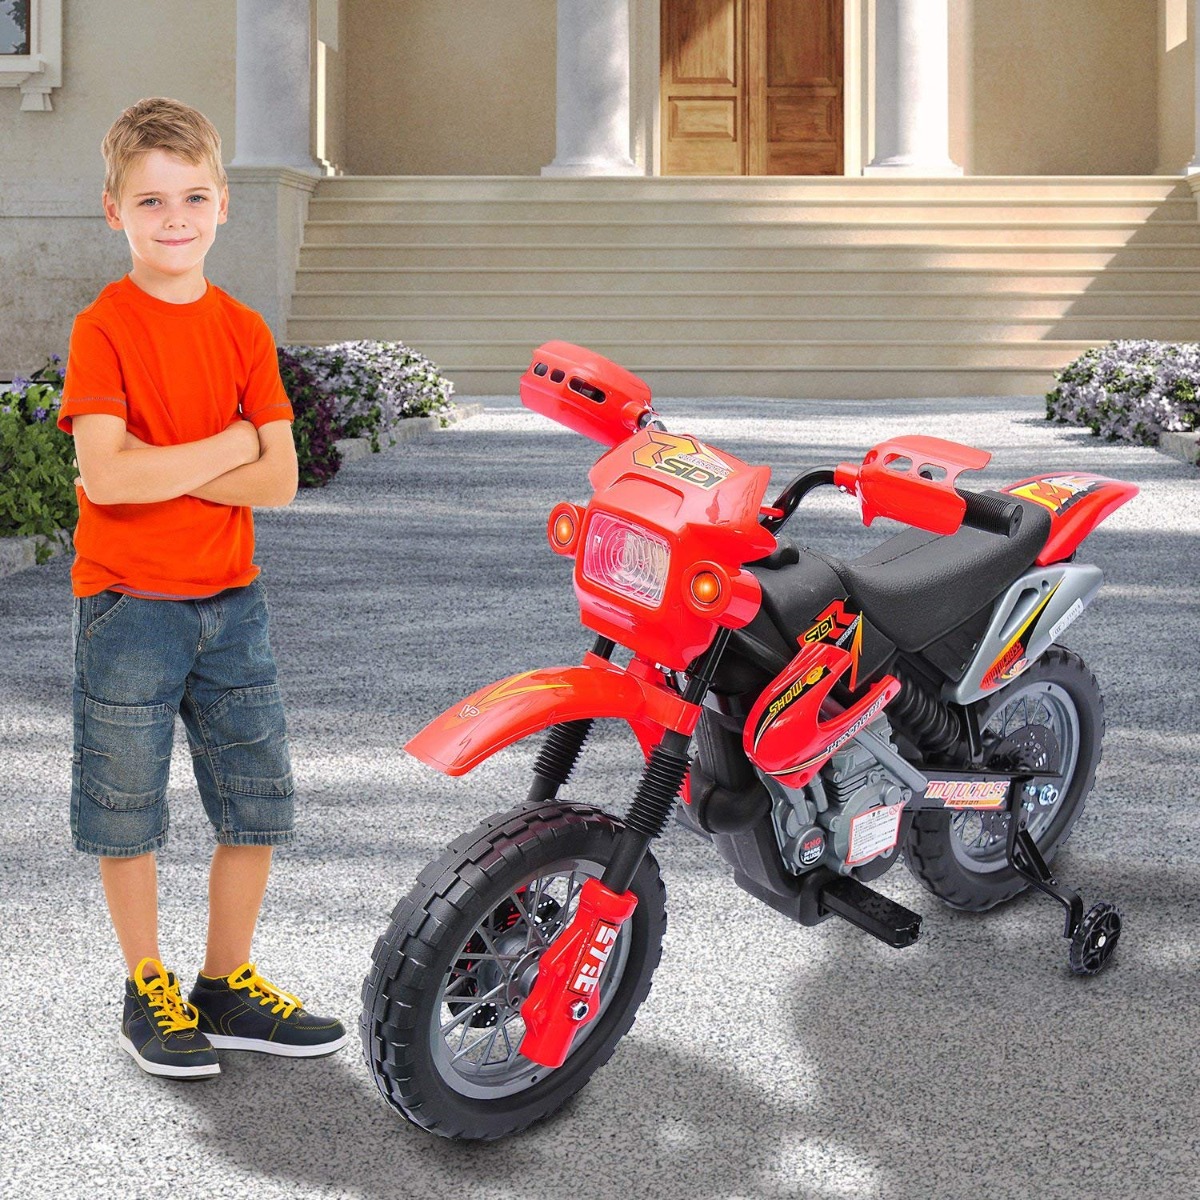 Maboto 6V Kids Electric Battery-Powered Ride-On Motorcycle Outdoor Recreation Dirt Bike Toy with Training Wheels for 3 - 6 Years Old - Red - image 1 of 7